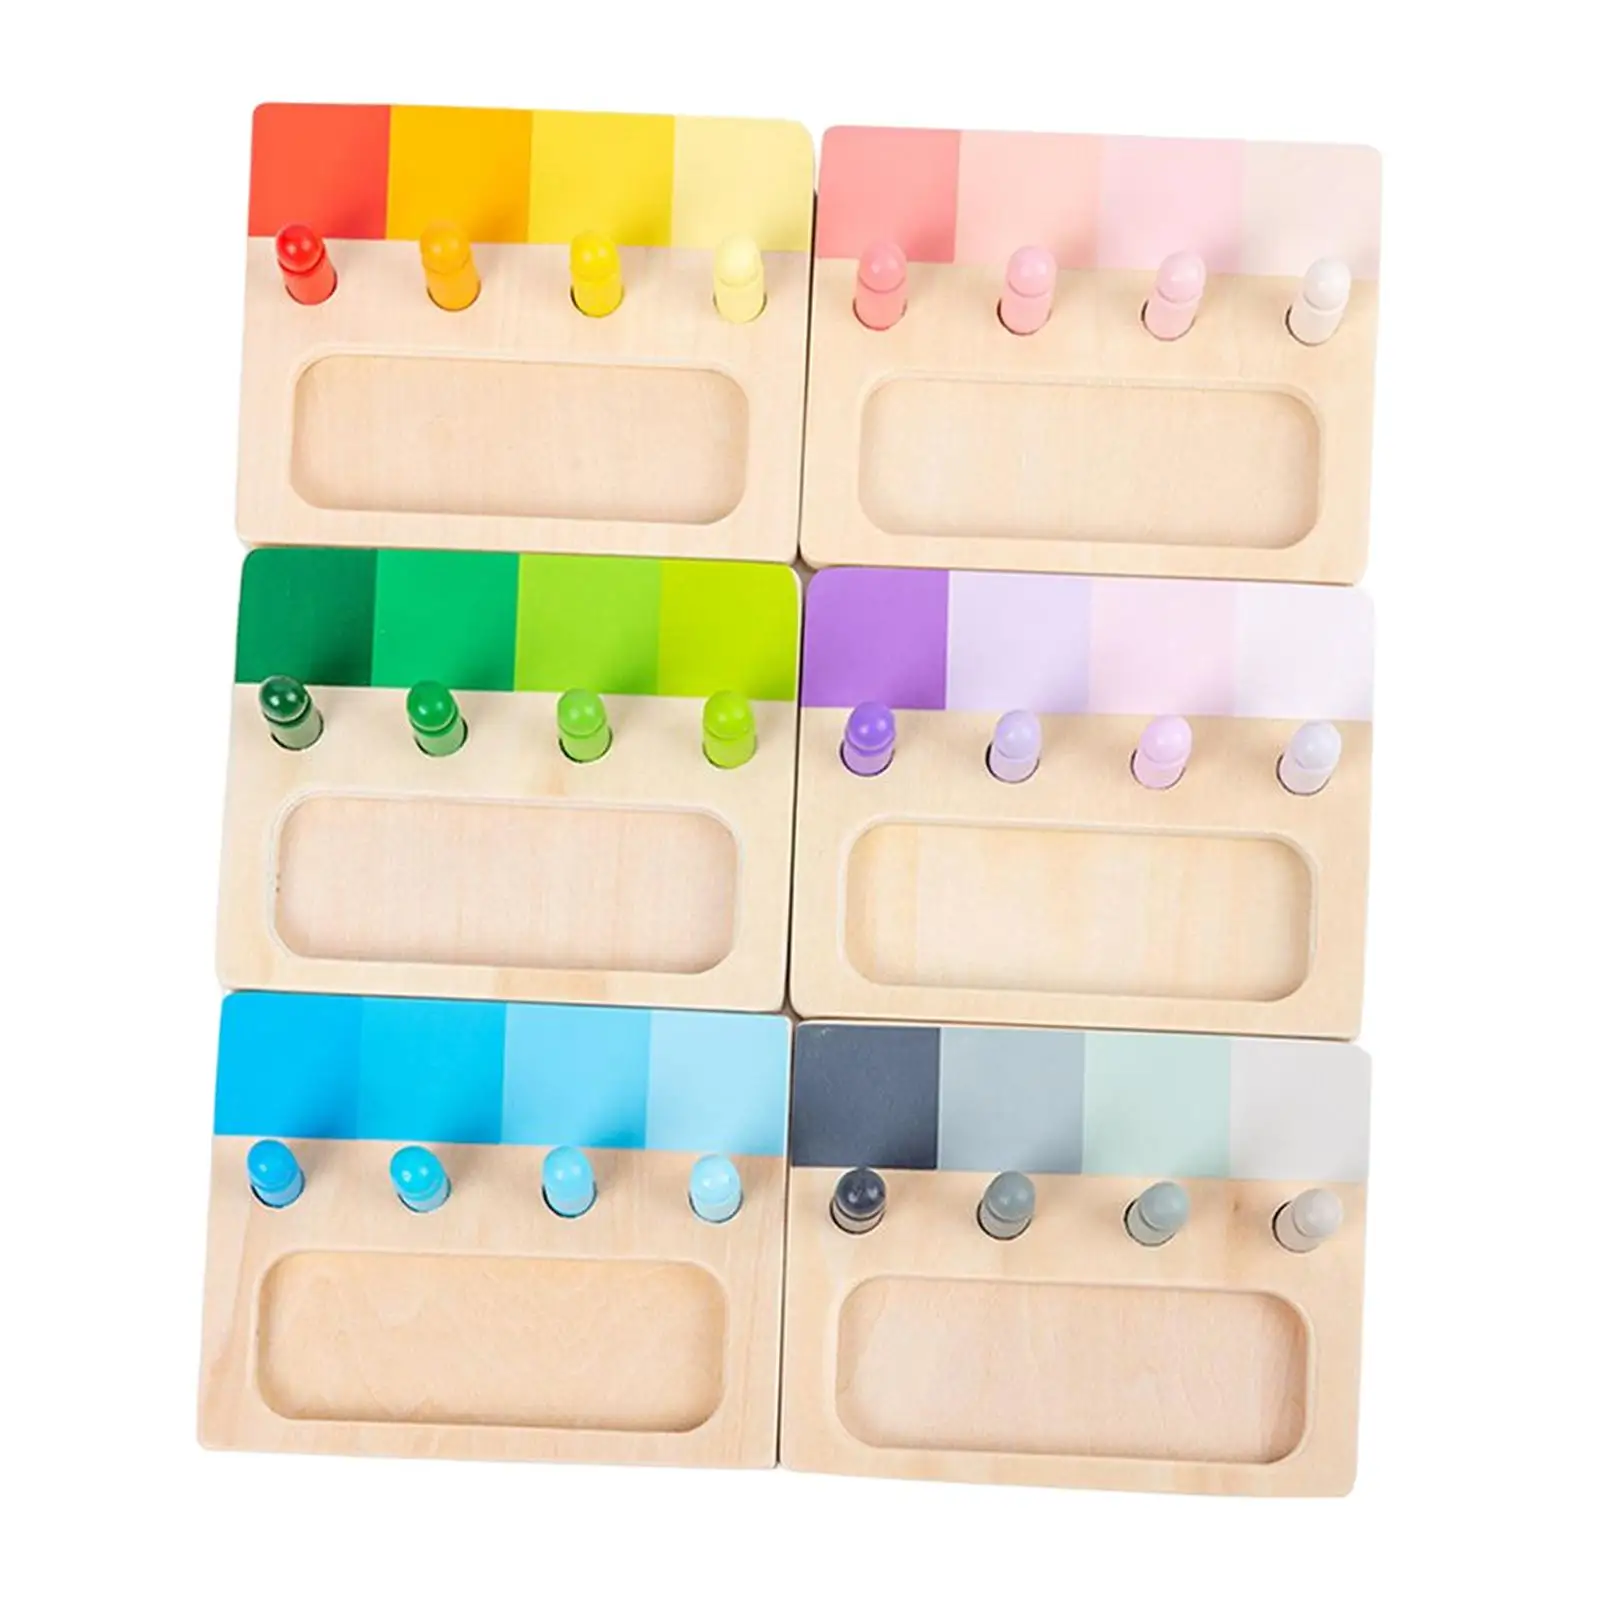 6 Piece Montessori Color Similarity Sorting Task Sensory Learning Tools with